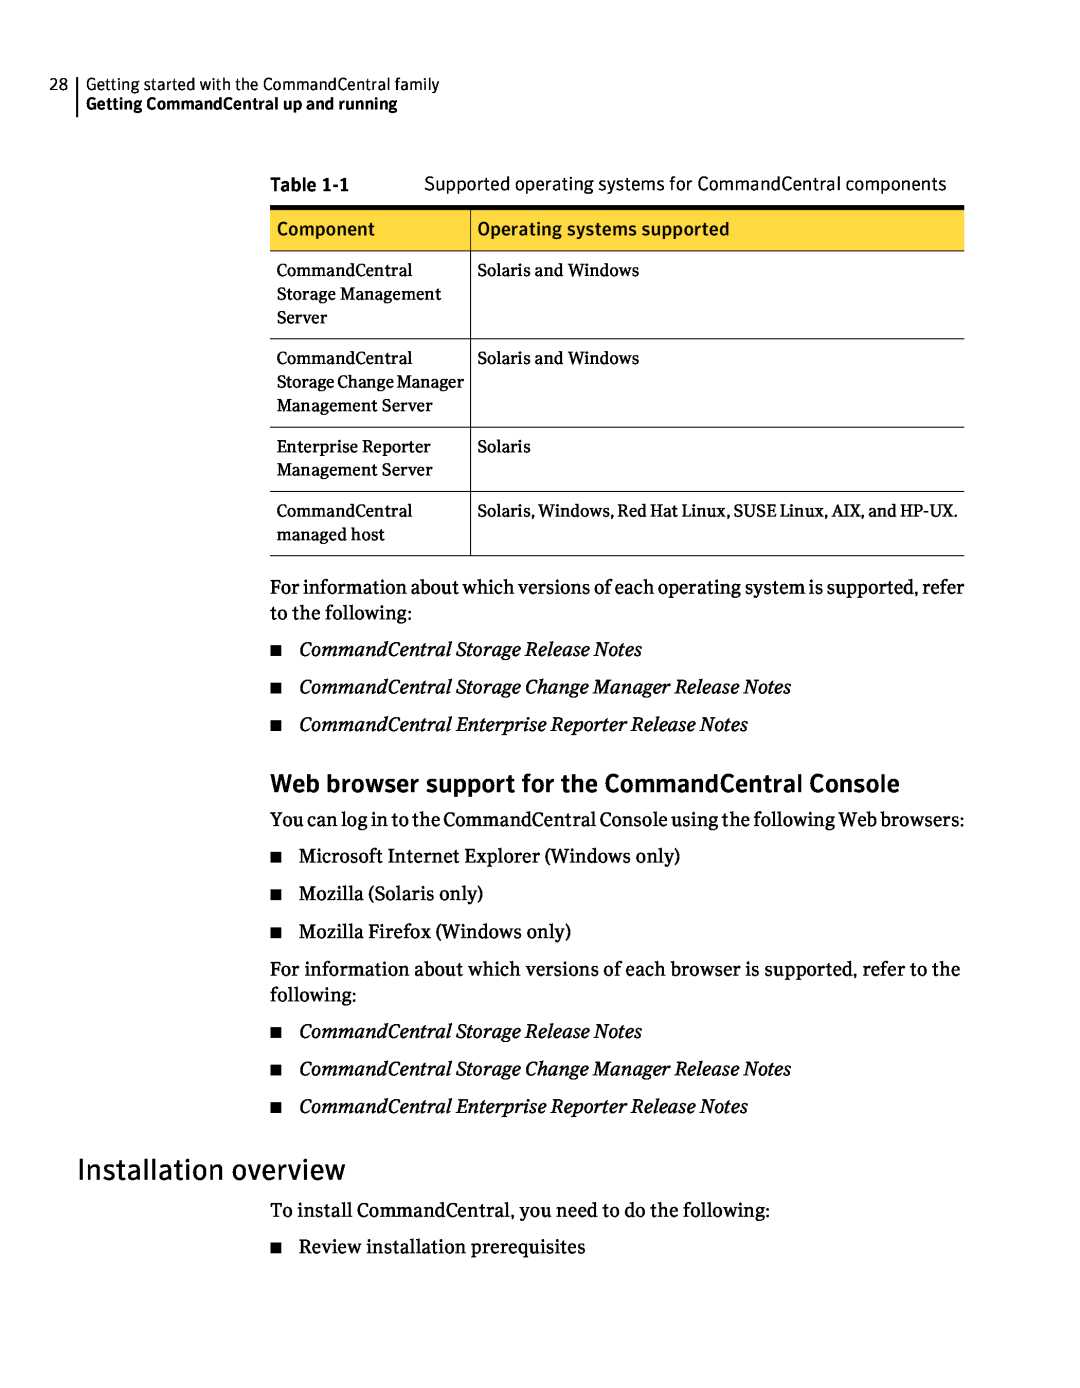 Symantec 5.1 manual Installation overview, Web browser support for the CommandCentral Console 